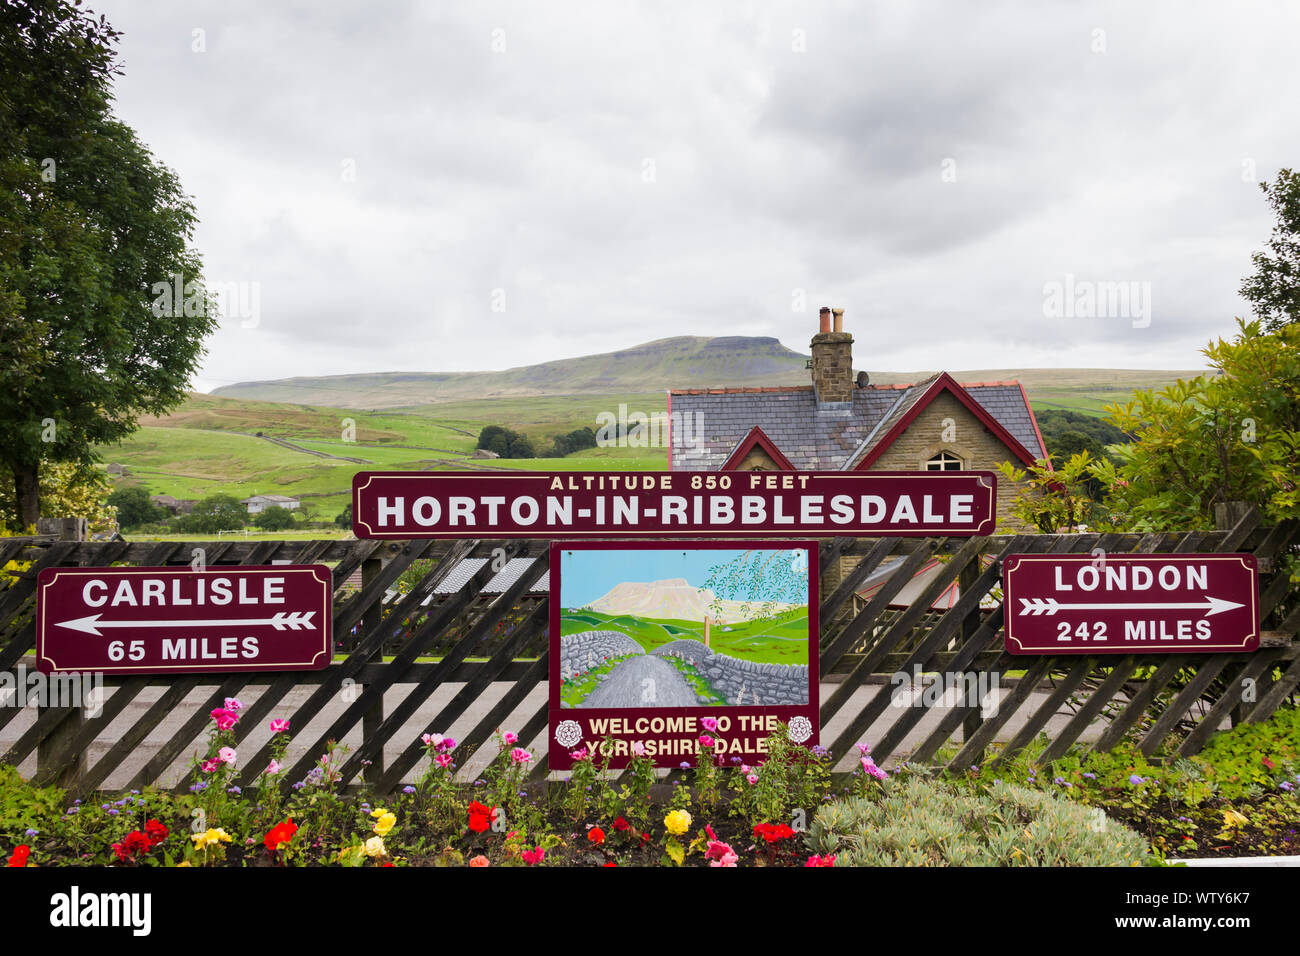 Mileage distance signs for Carlisle and London on the  railway station at Horton-in-Ribblesdale, North Yorkshire overlooked by distant Pen-Y-Ghent Stock Photo